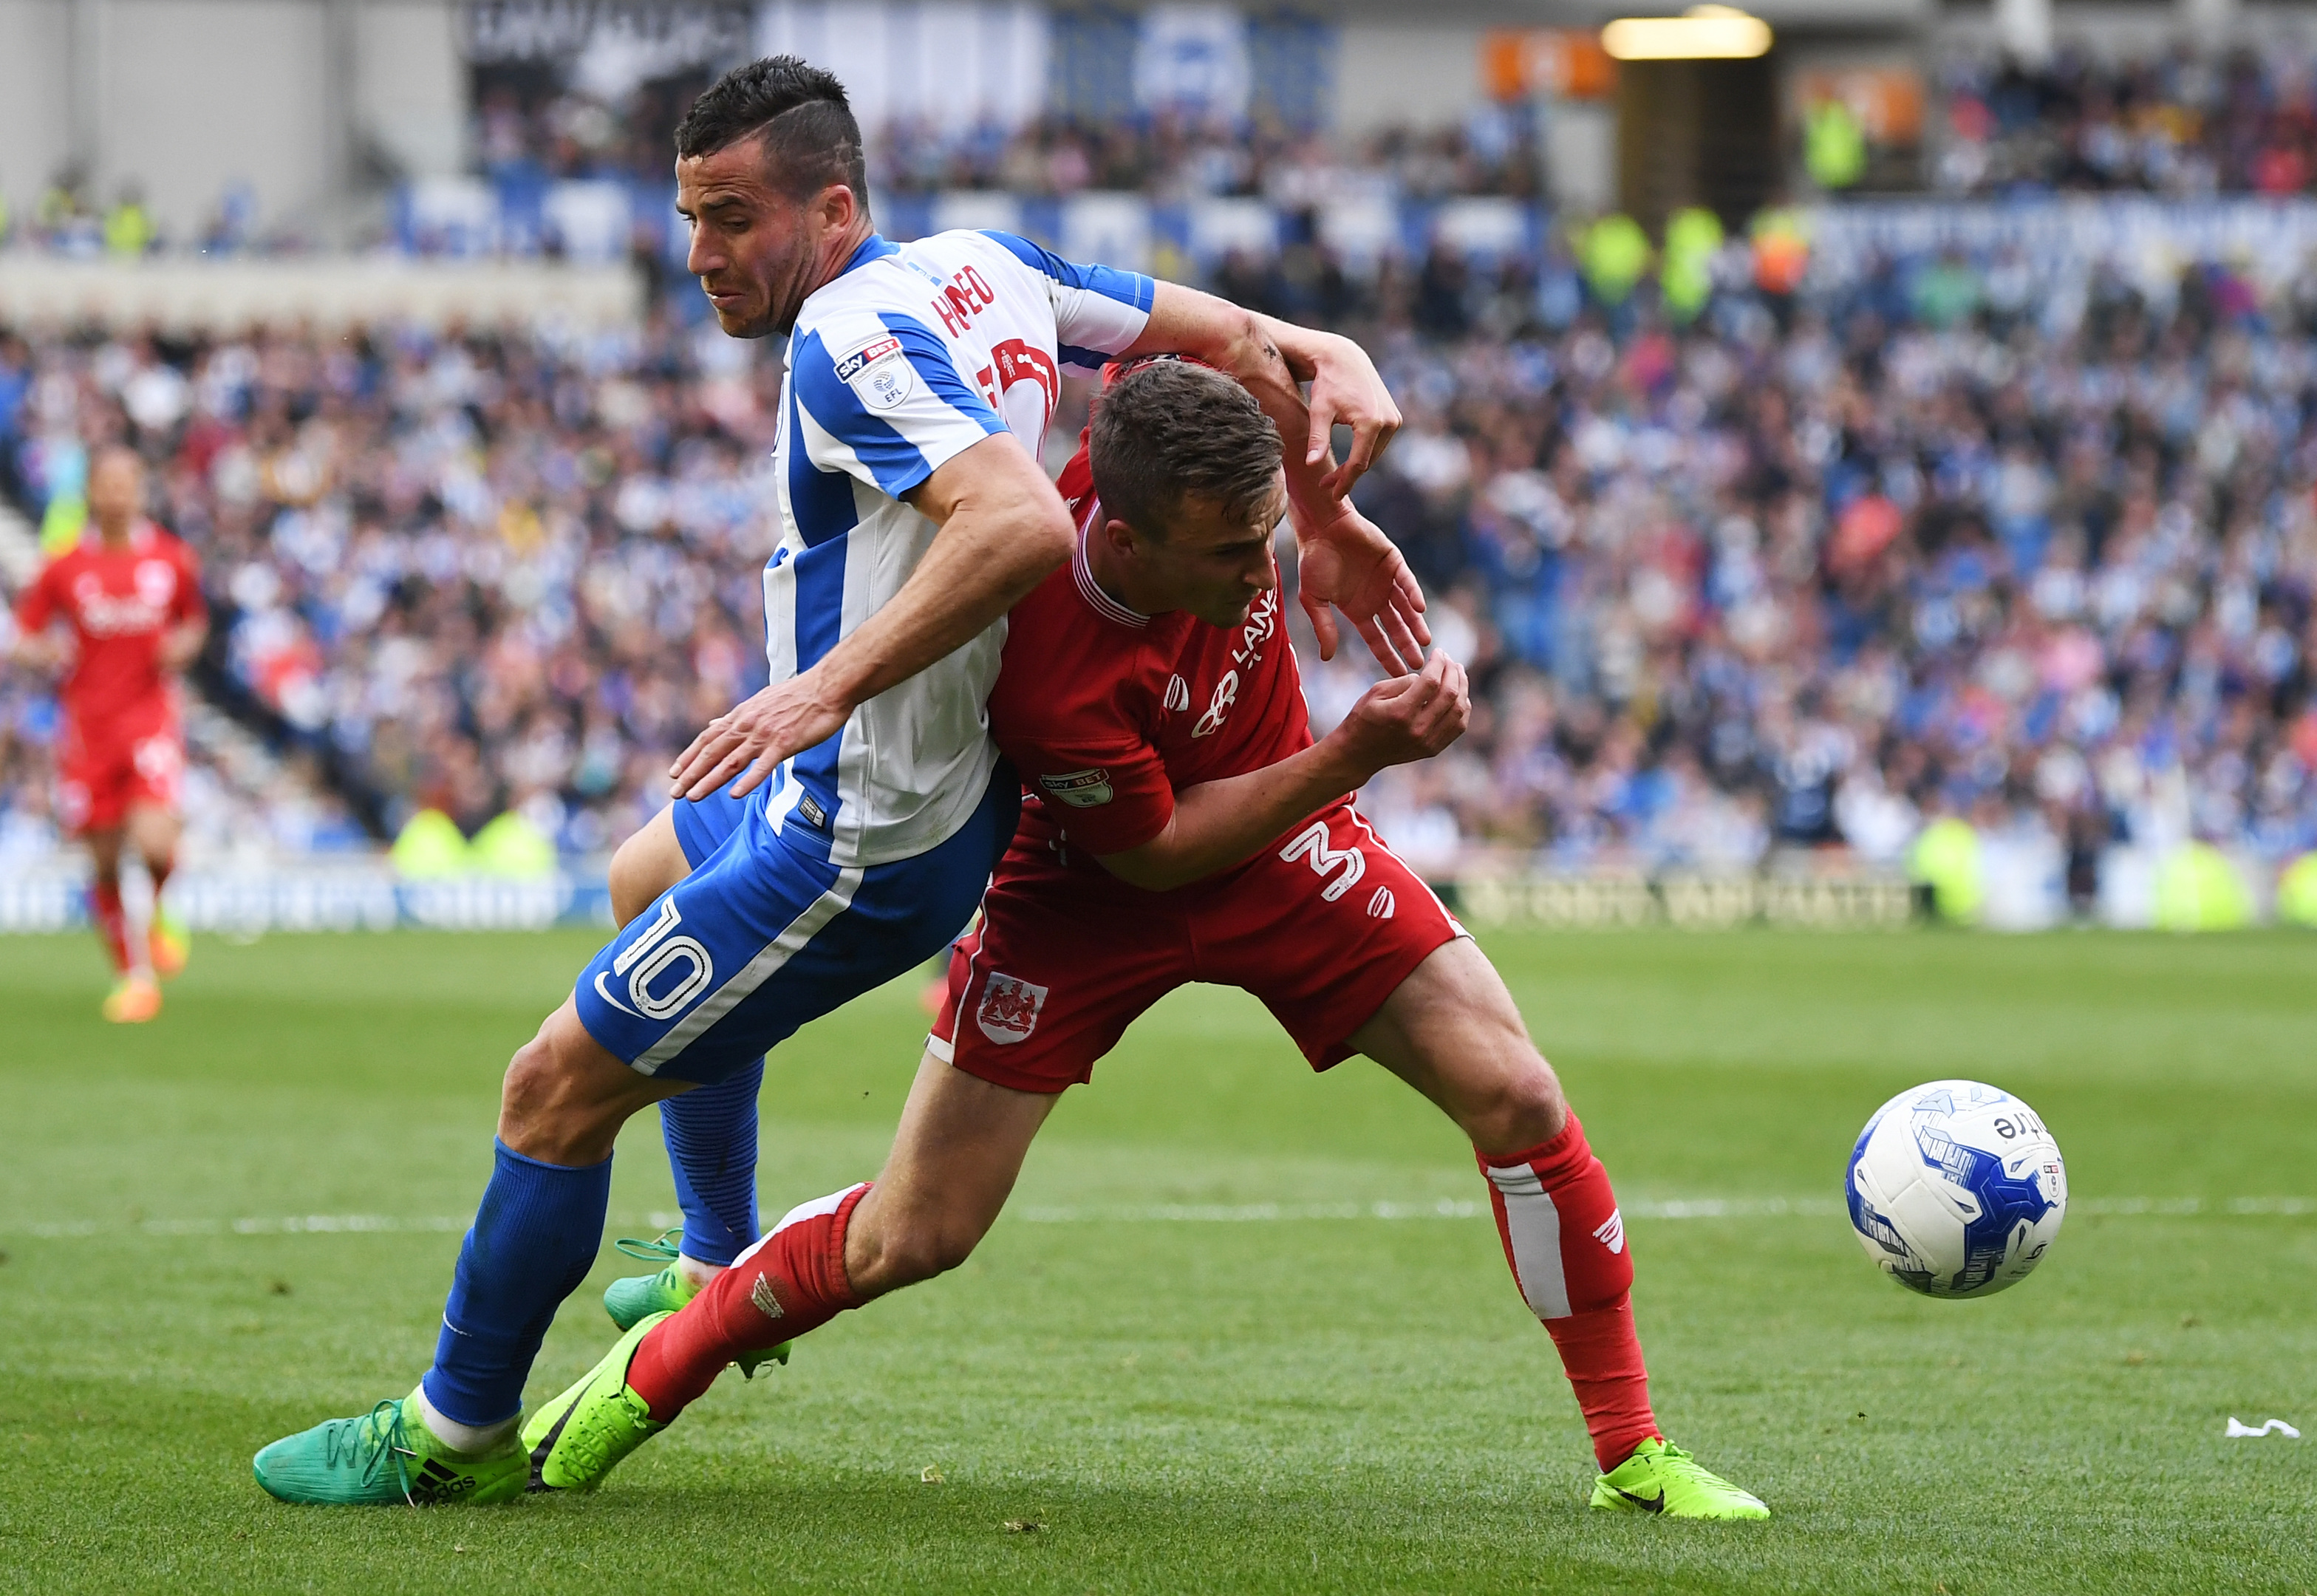 Tomer Hemed of Brighton and Hove Albion goes to ground after a challenge by Joe Bryan of Bristol City (Mike Hewitt/Getty Images)